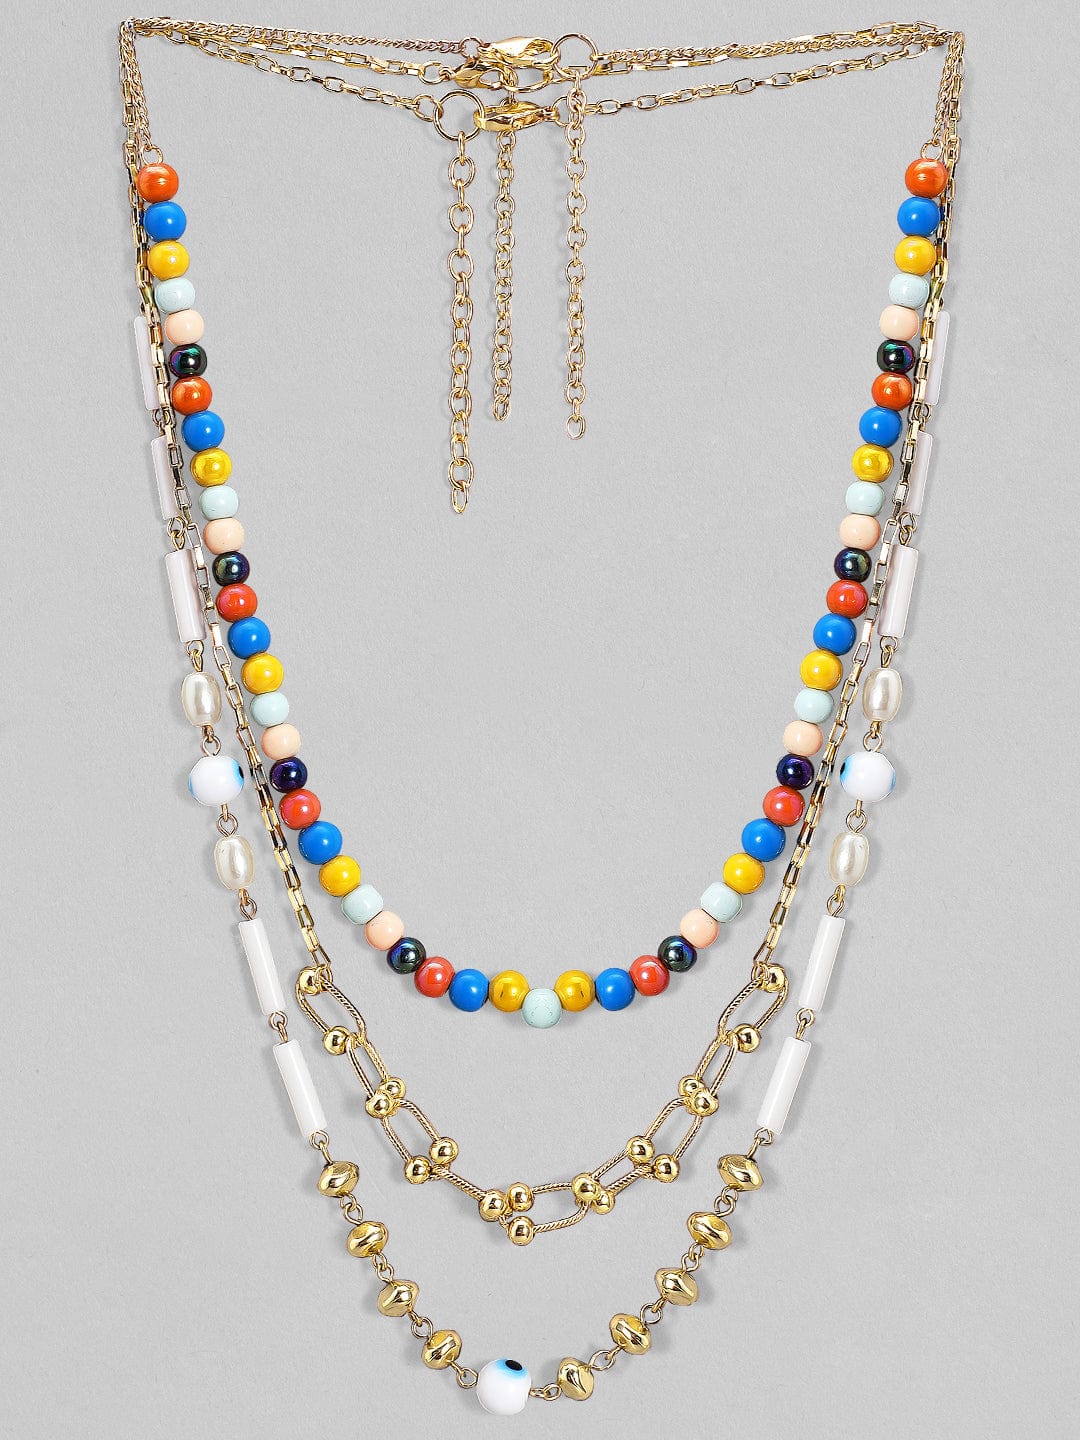 Rubans Voguish Multicolored Handcrafted Necklace Chain &amp; Necklaces